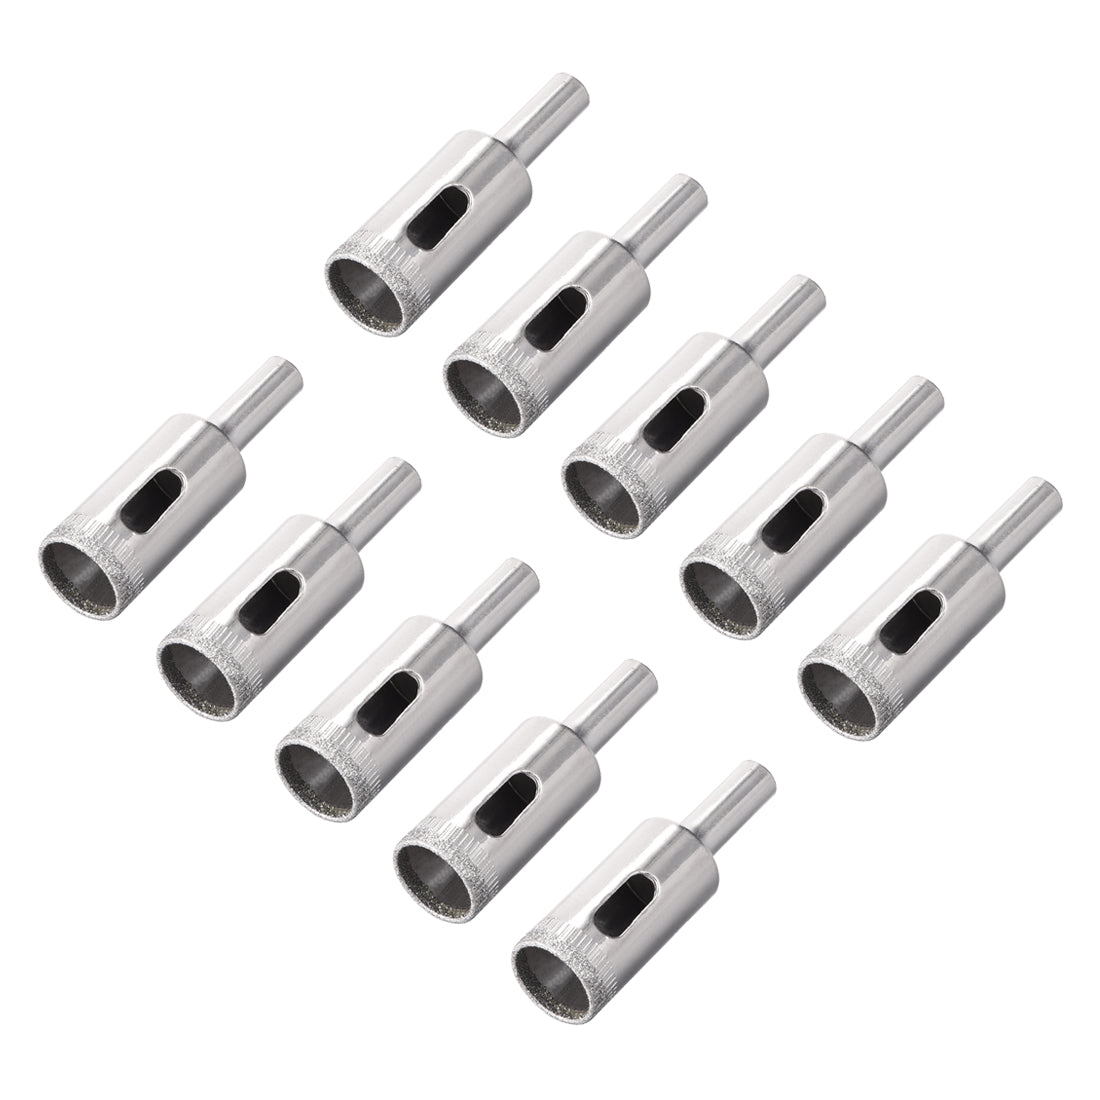 Uxcell Uxcell 22mm Diamond Drill Bits Hole Saws for Glass Ceramic Porcelain Tiles 10 Pcs